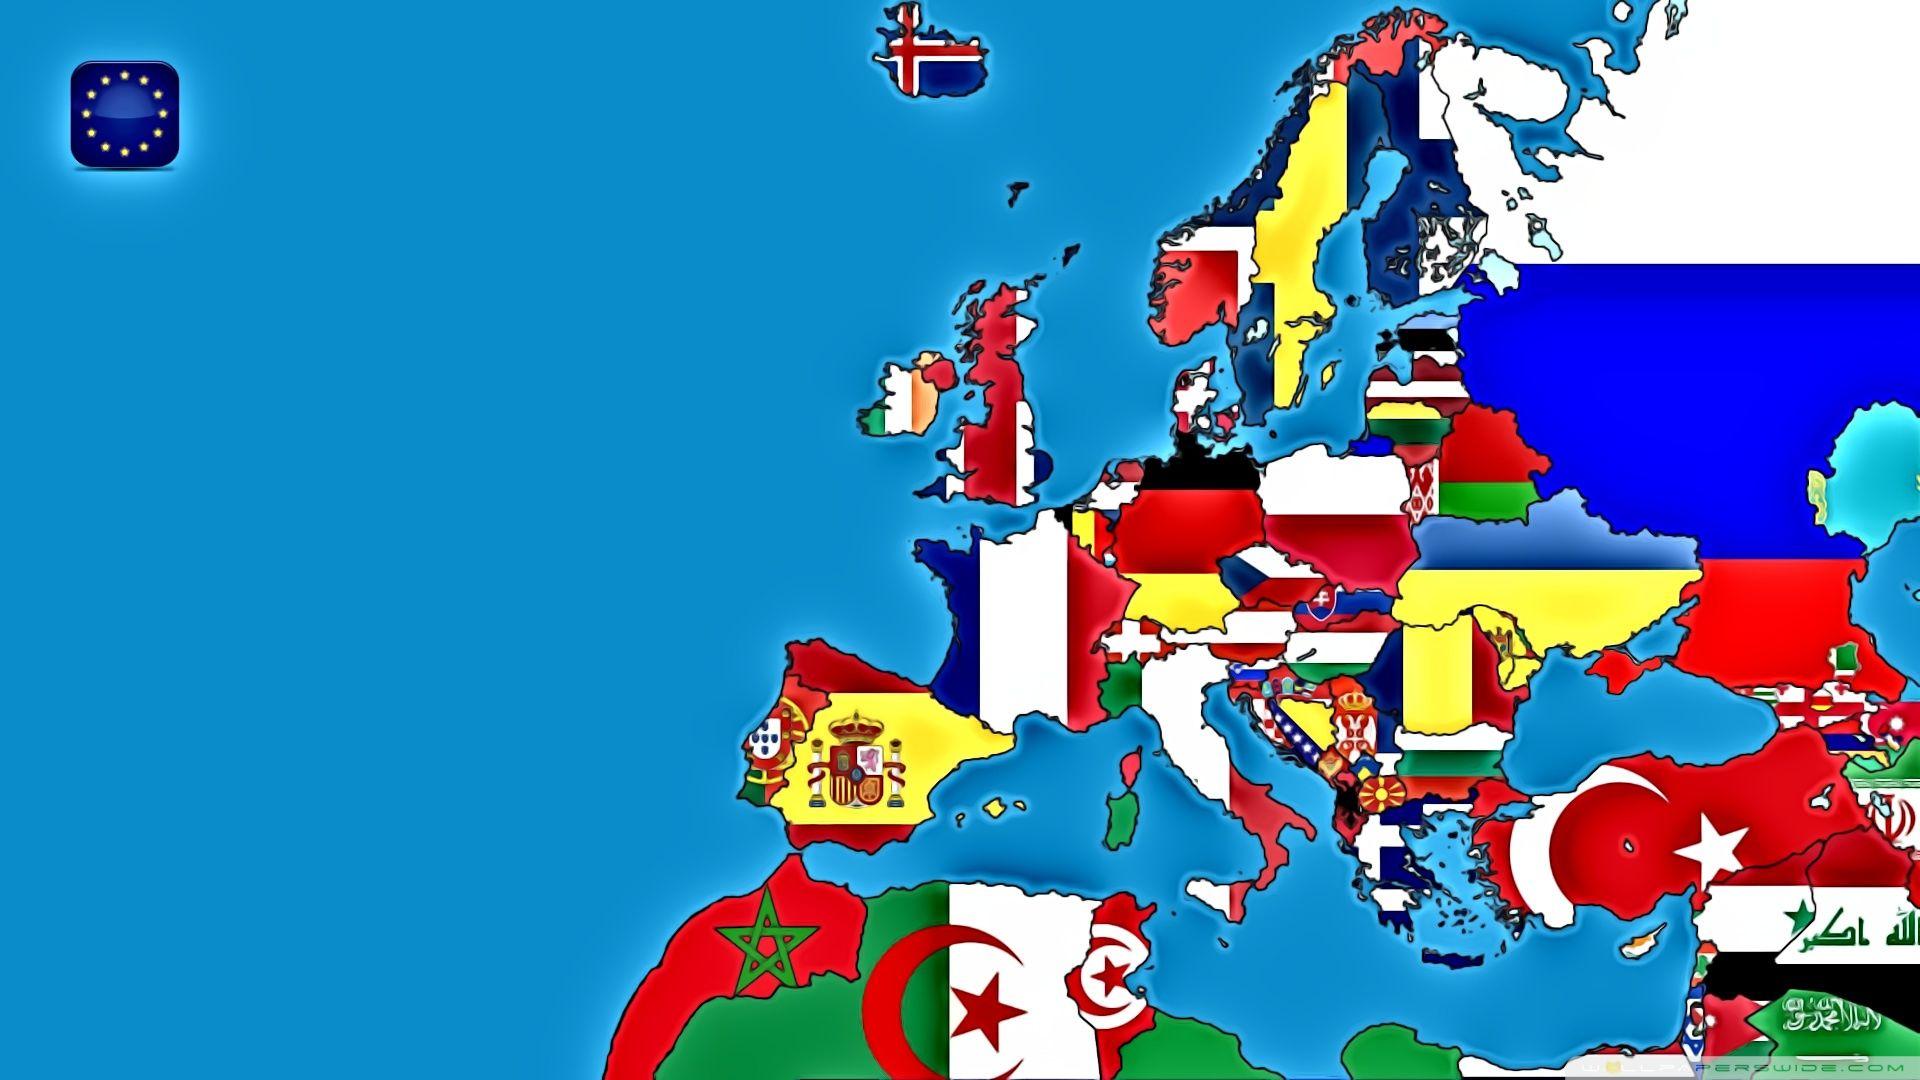 European map with flags Ultra HD .wallpaperwide.com